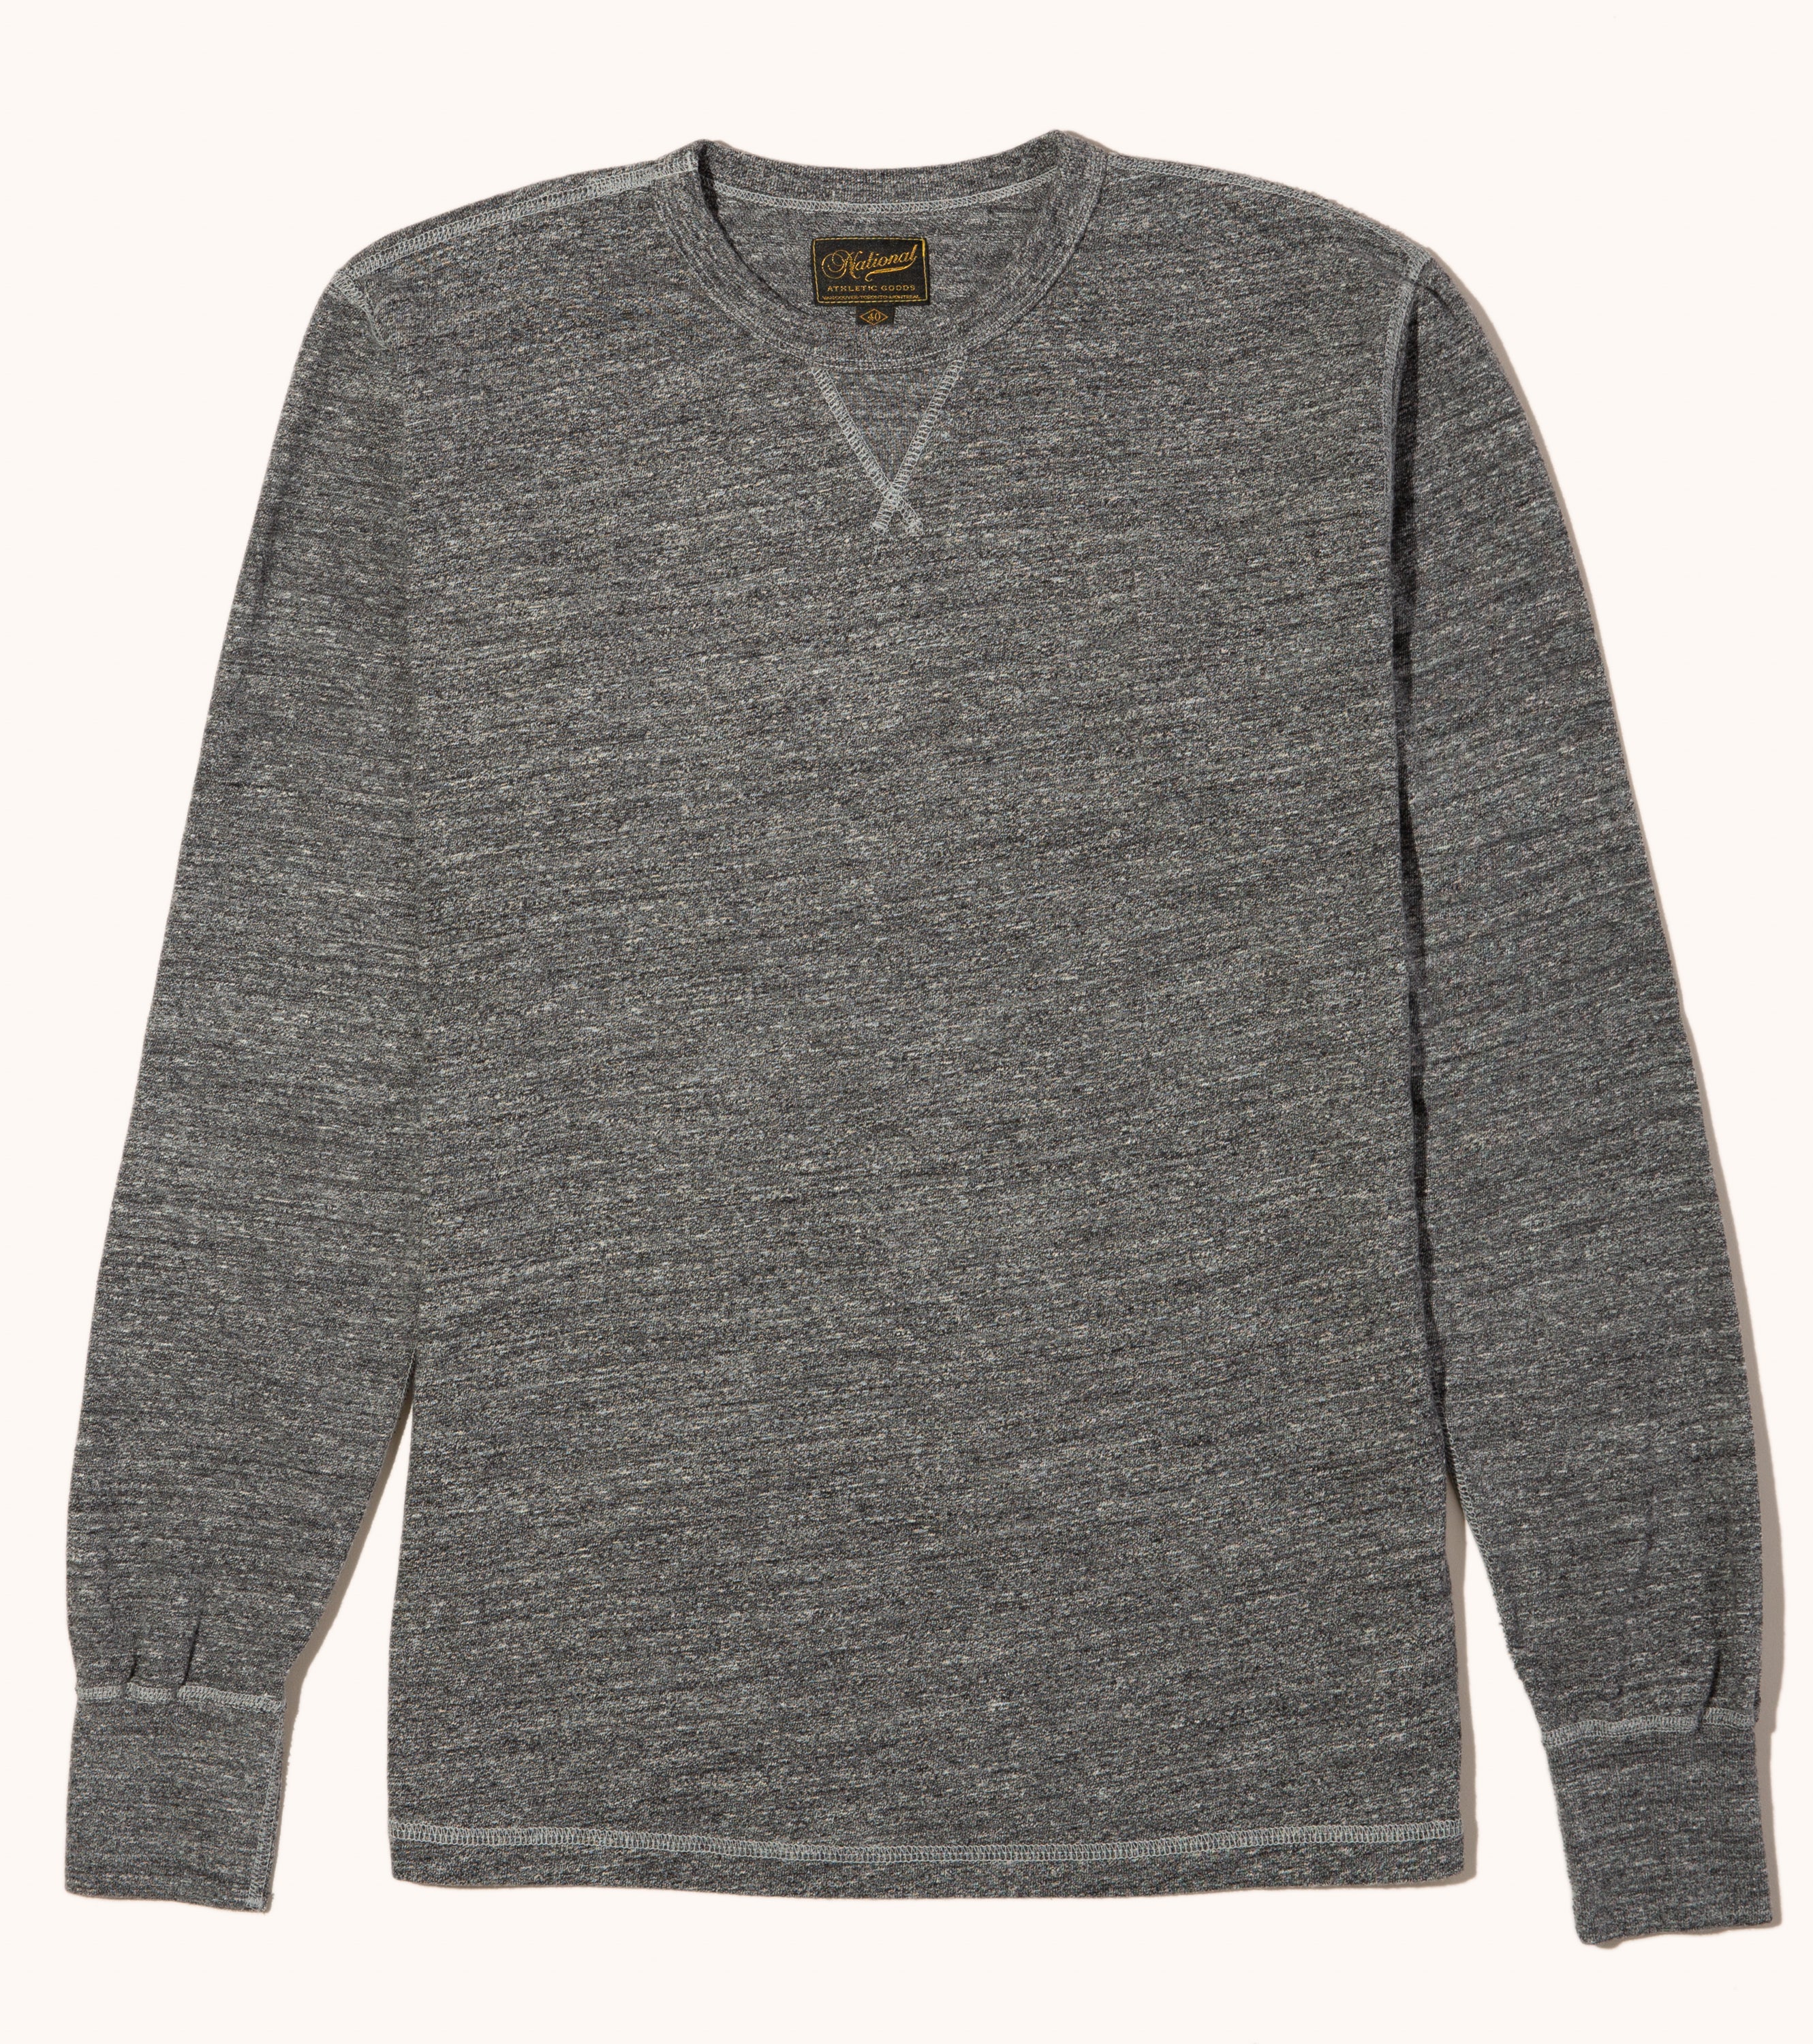 Best long-sleeve T-shirts for men